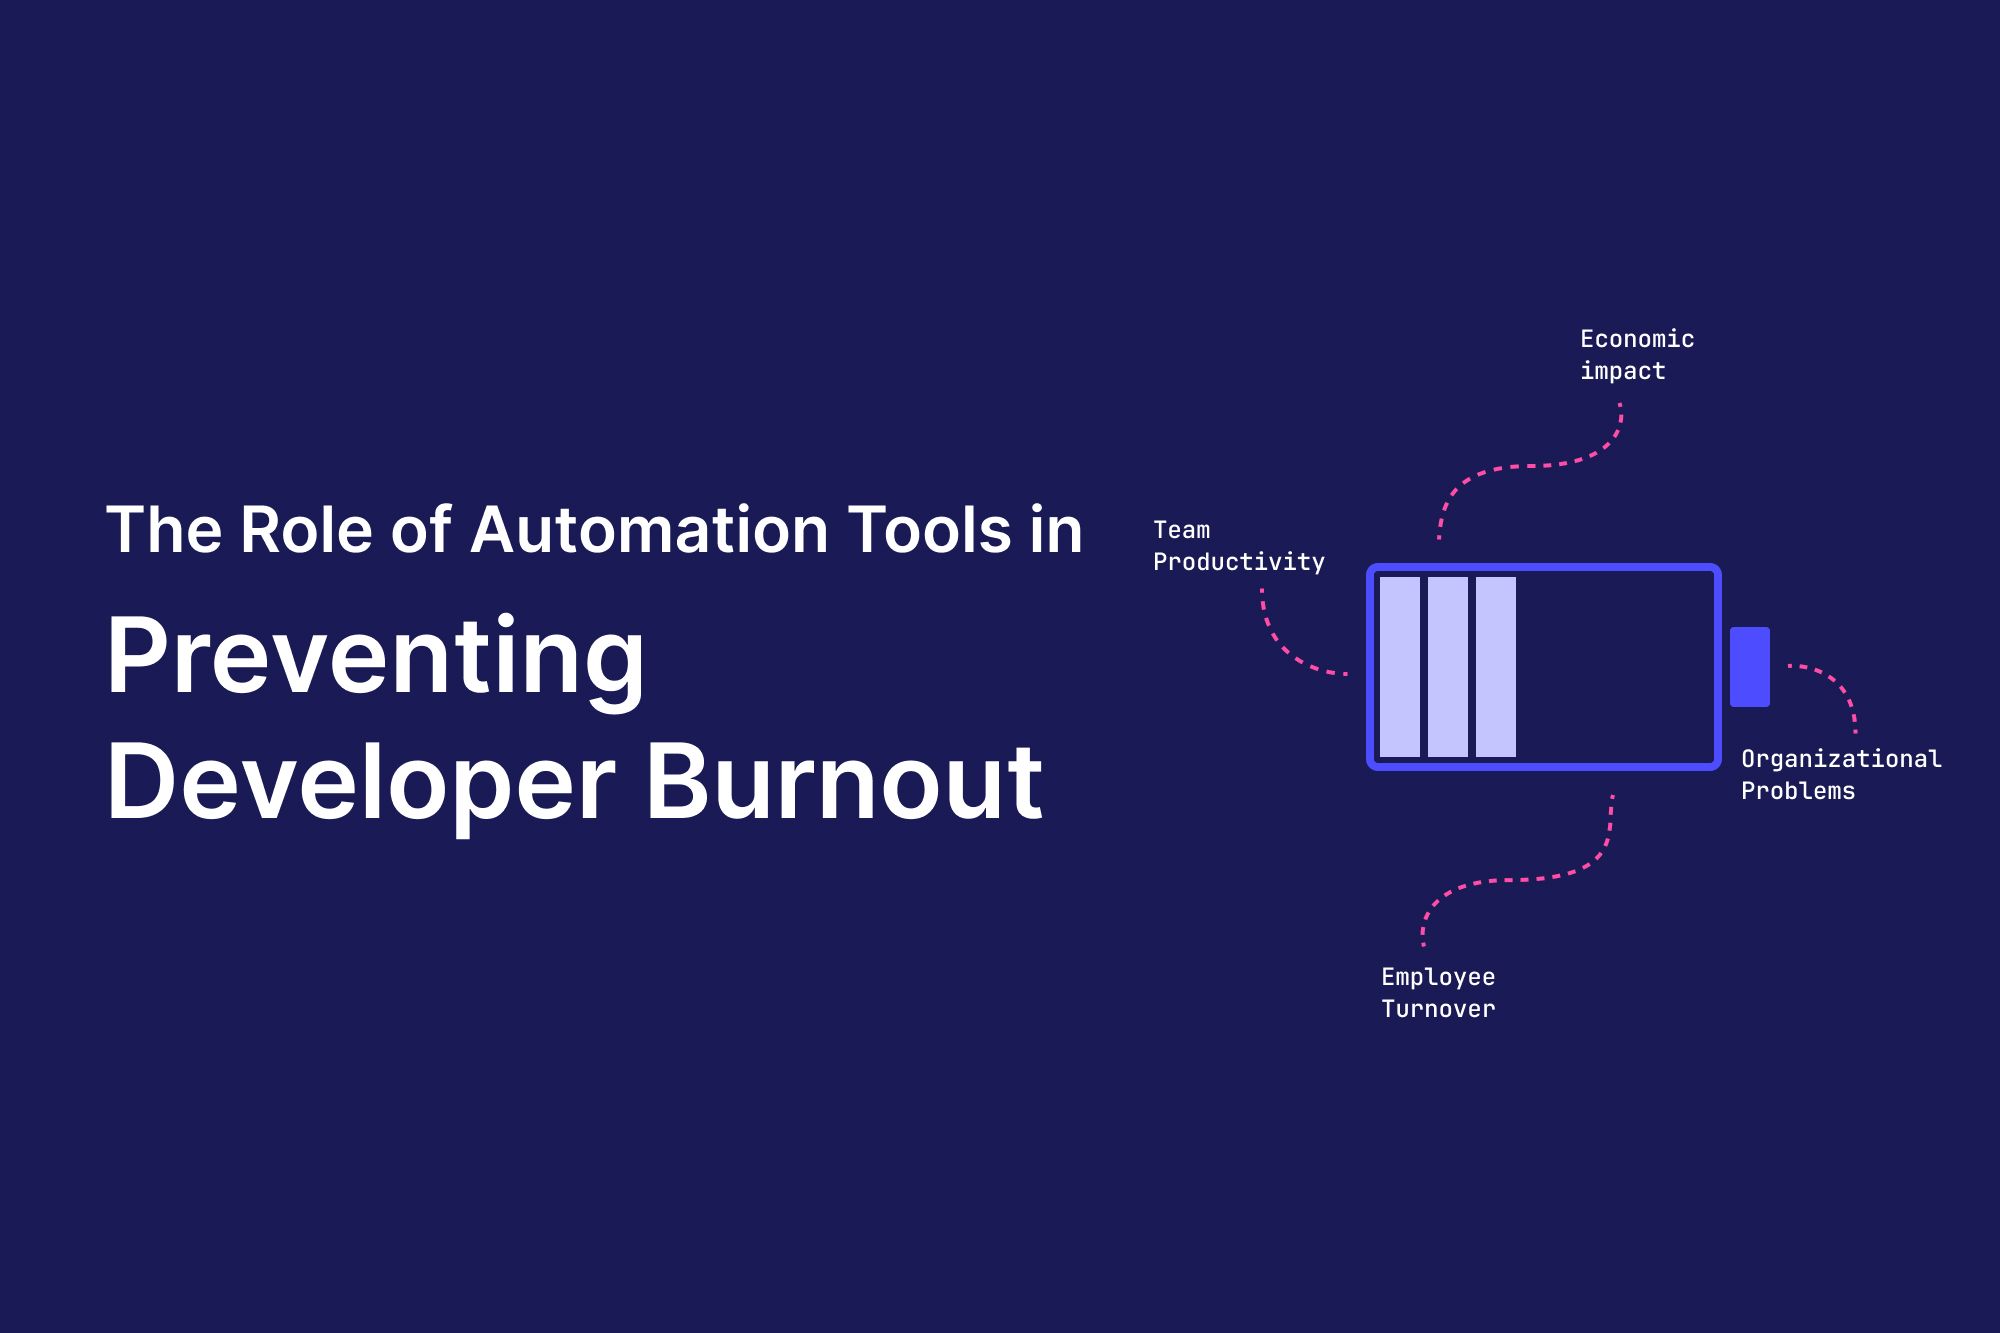 The Role of Automation Tools: How to Prevent Developer Burnout